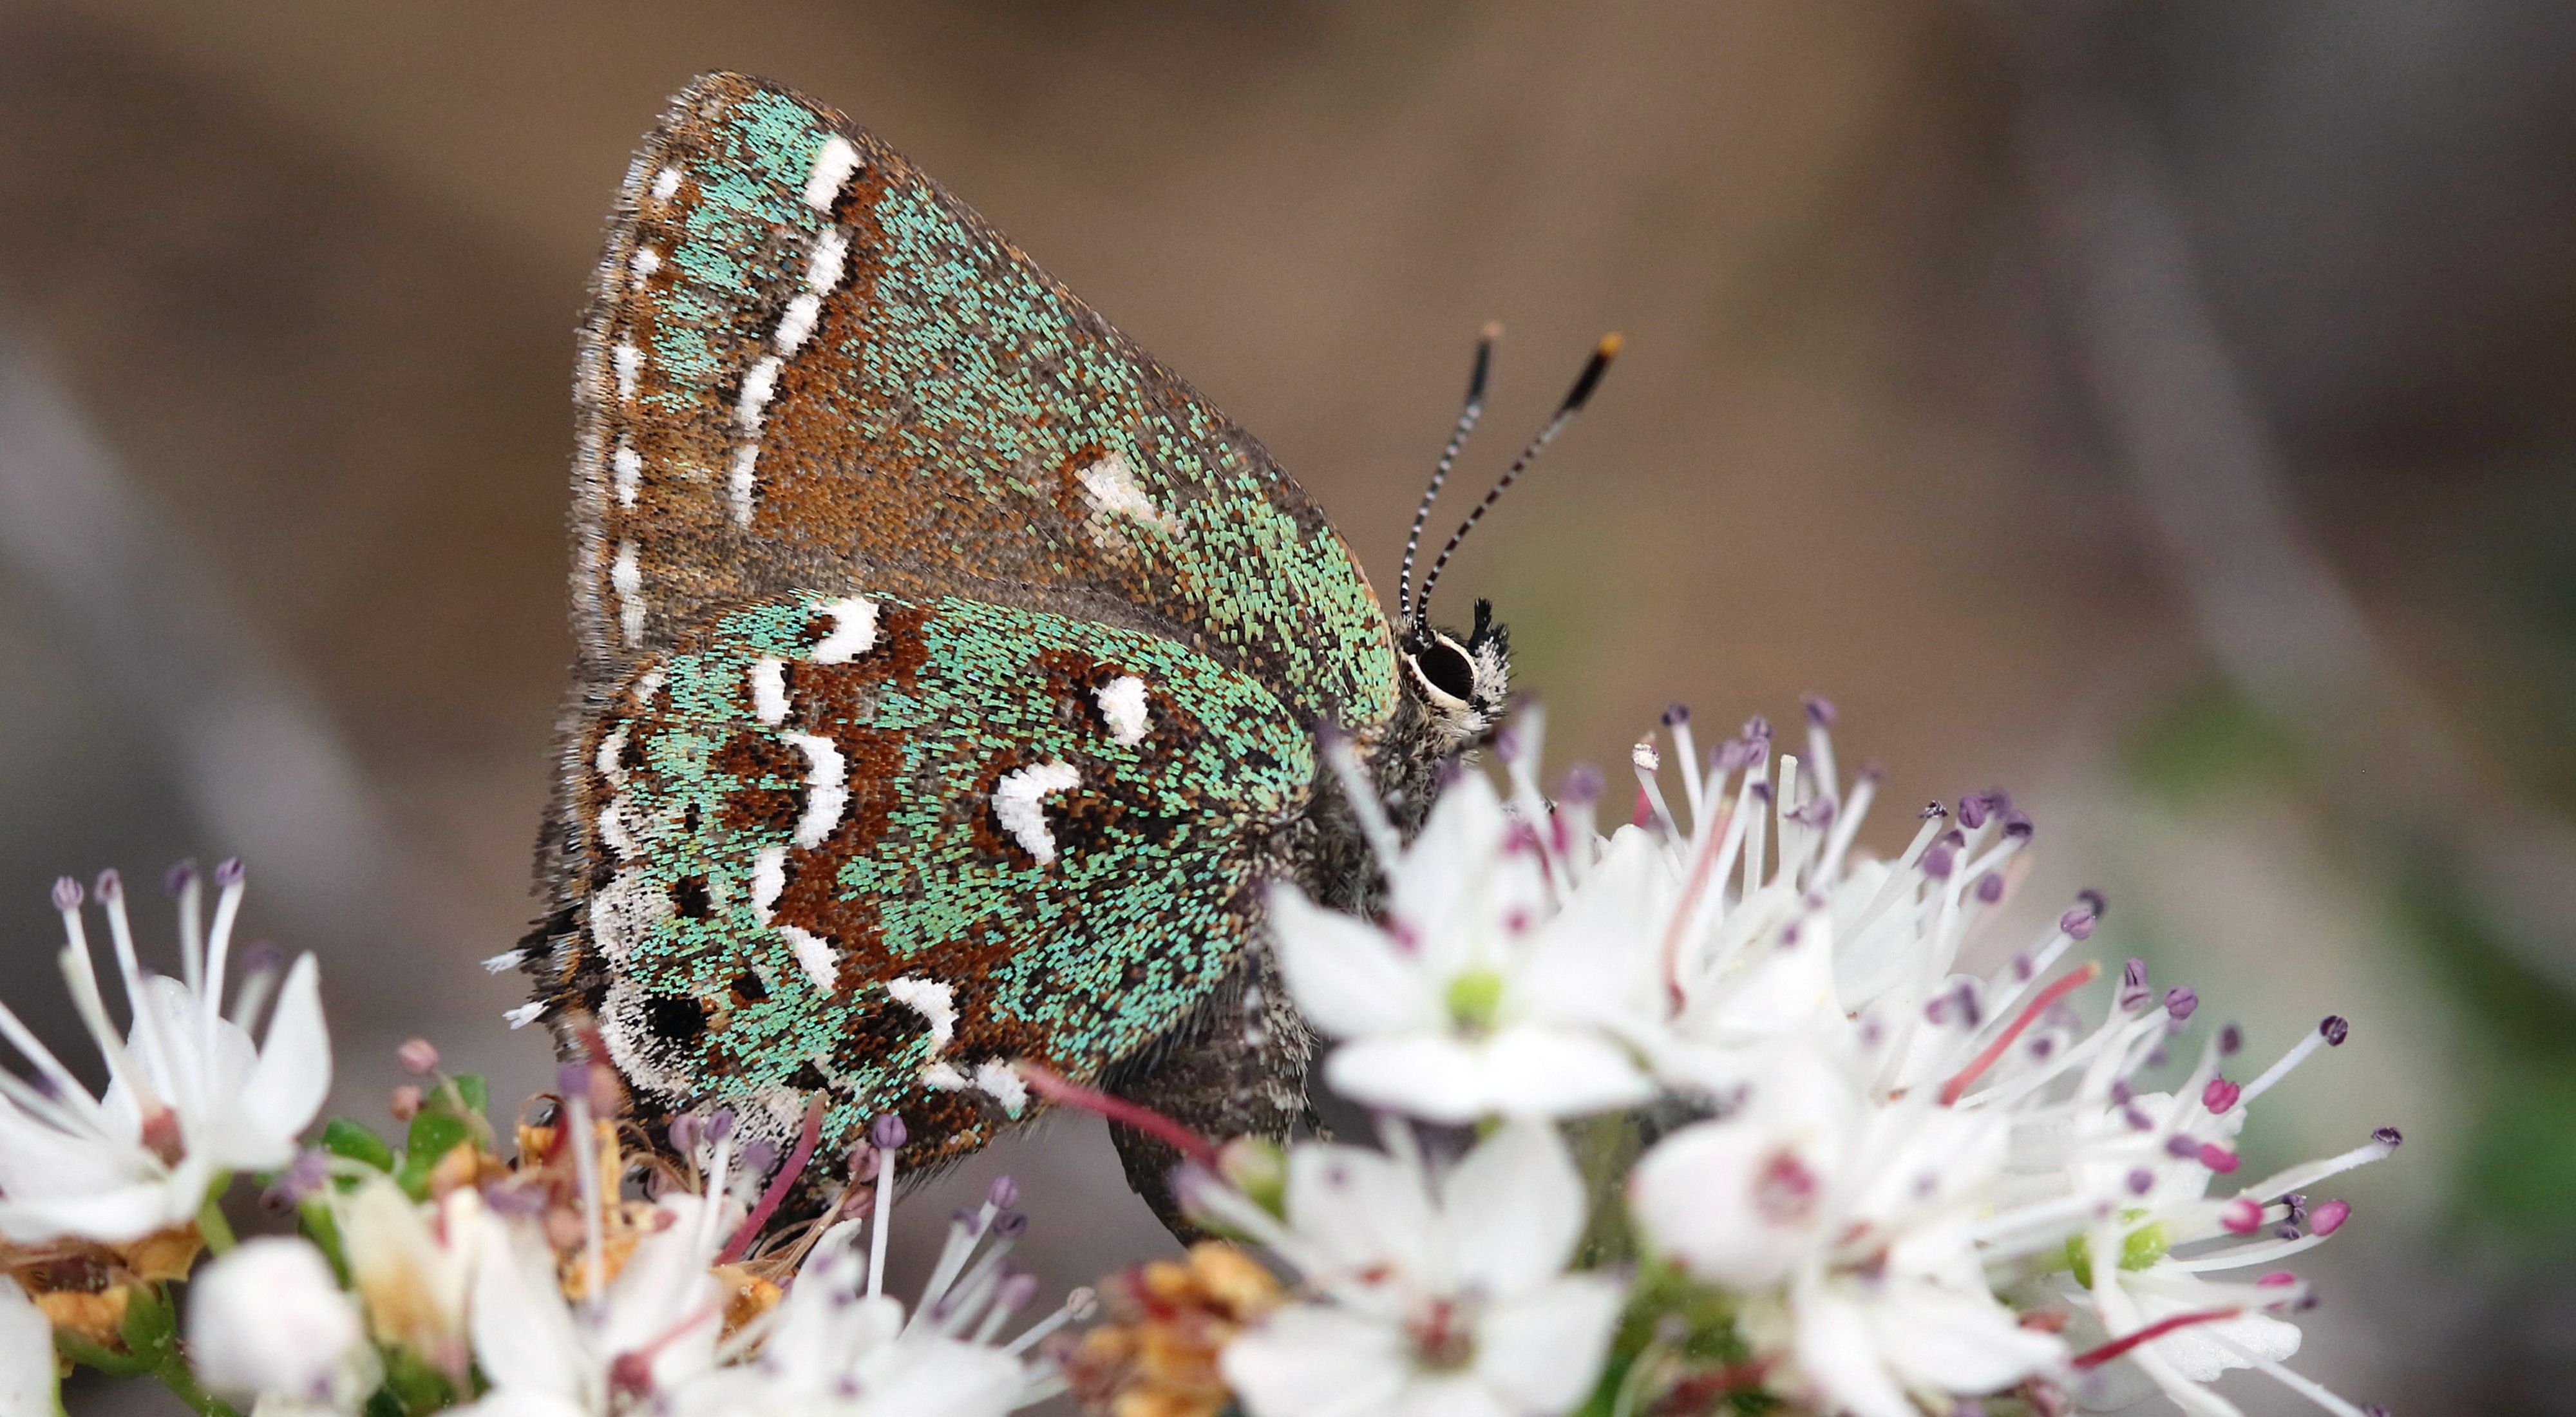 A butterfly with green wings dotted with brown and white eyes sips nectar from a plant with small clusters of white flowers.